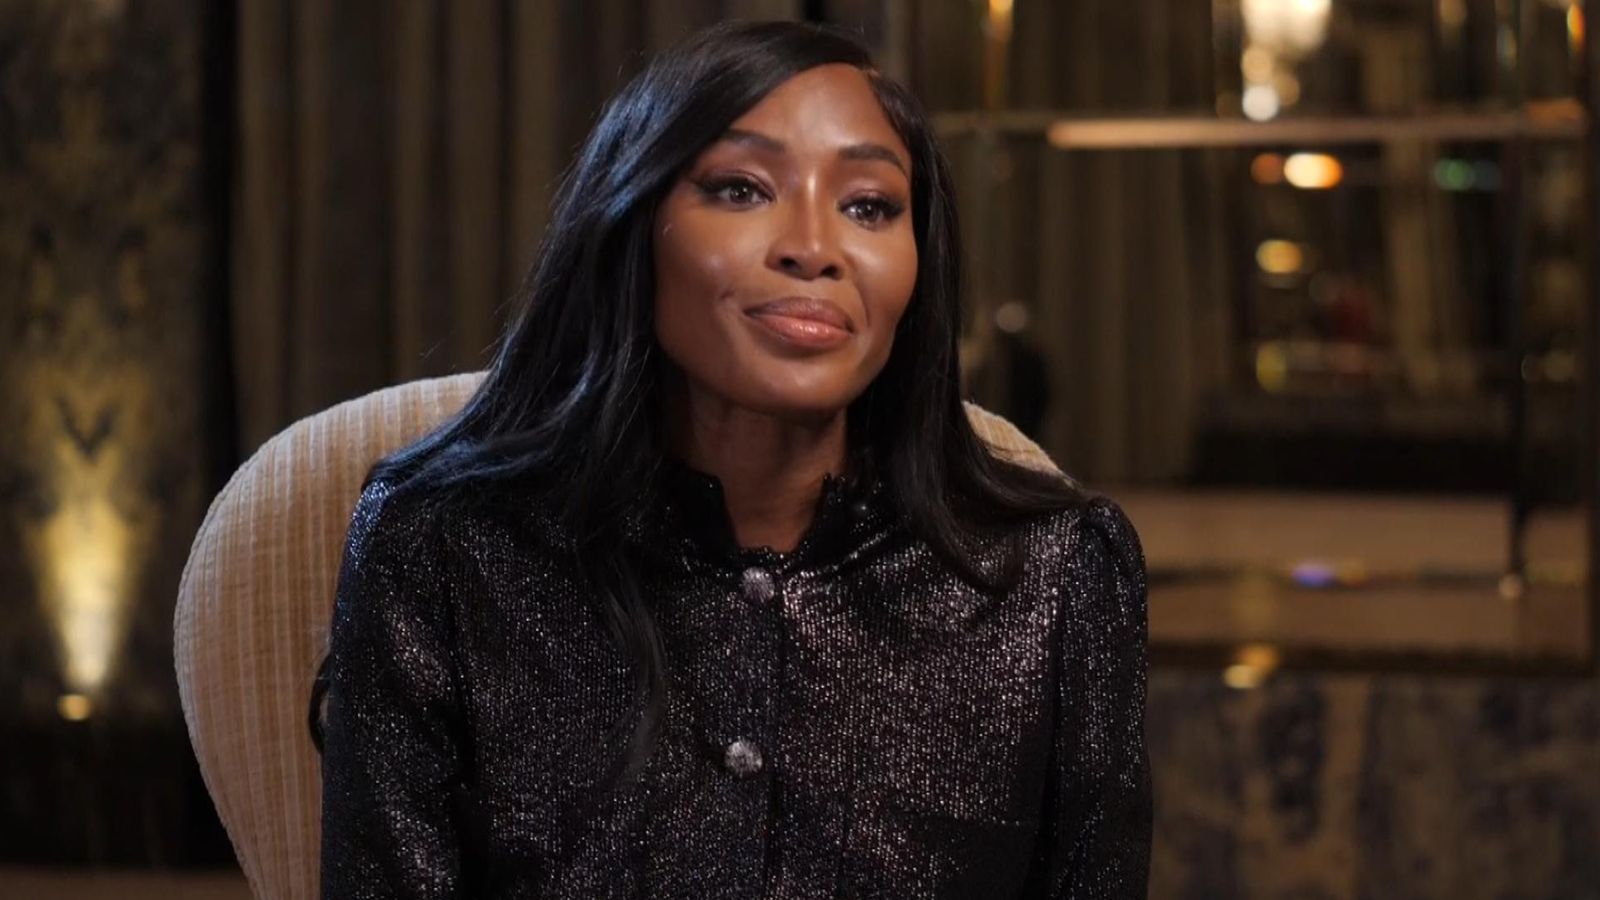 Naomi Campbell on modelling into her 50s, battling racism and her new museum exhibition